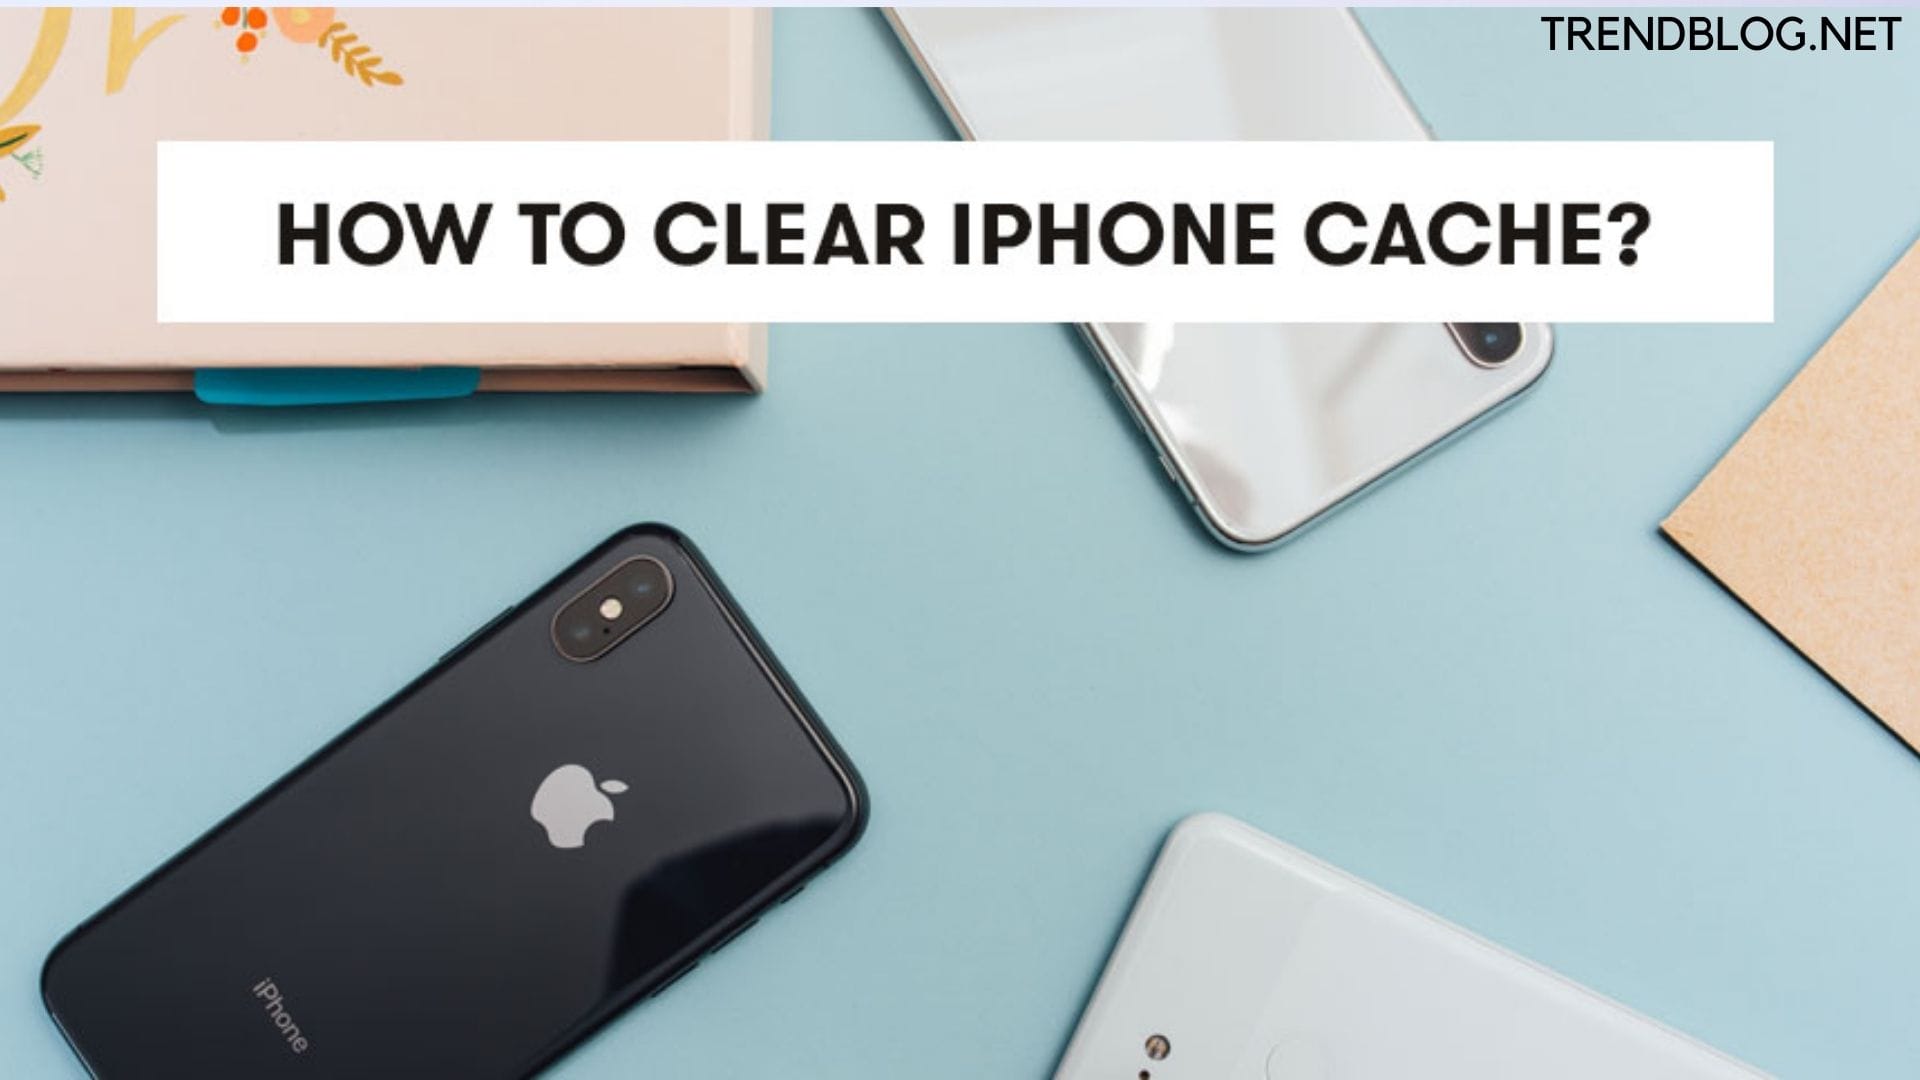  3 Ways to Clear Cache on iPhone Using Safari, Chrome, and the Firefox